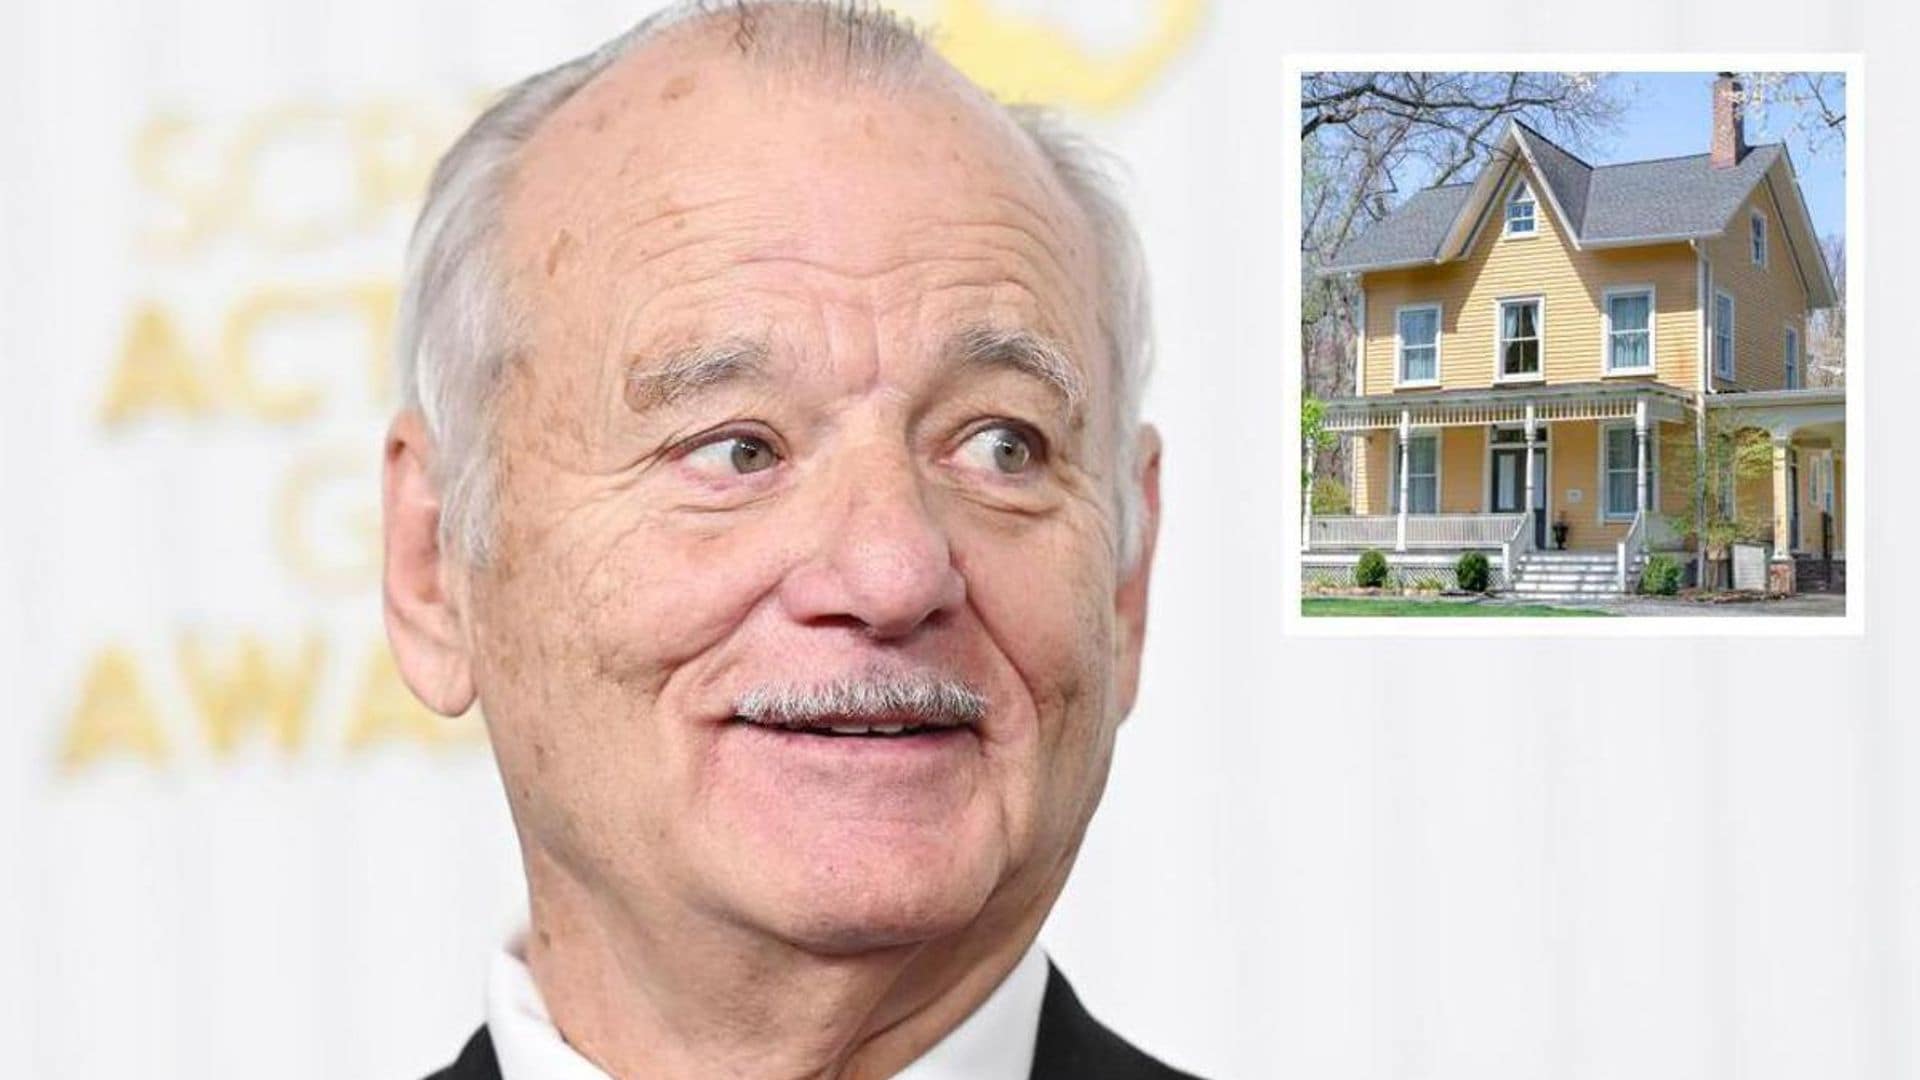 Bill Murray’s old New York home is on the market for $2.07 million